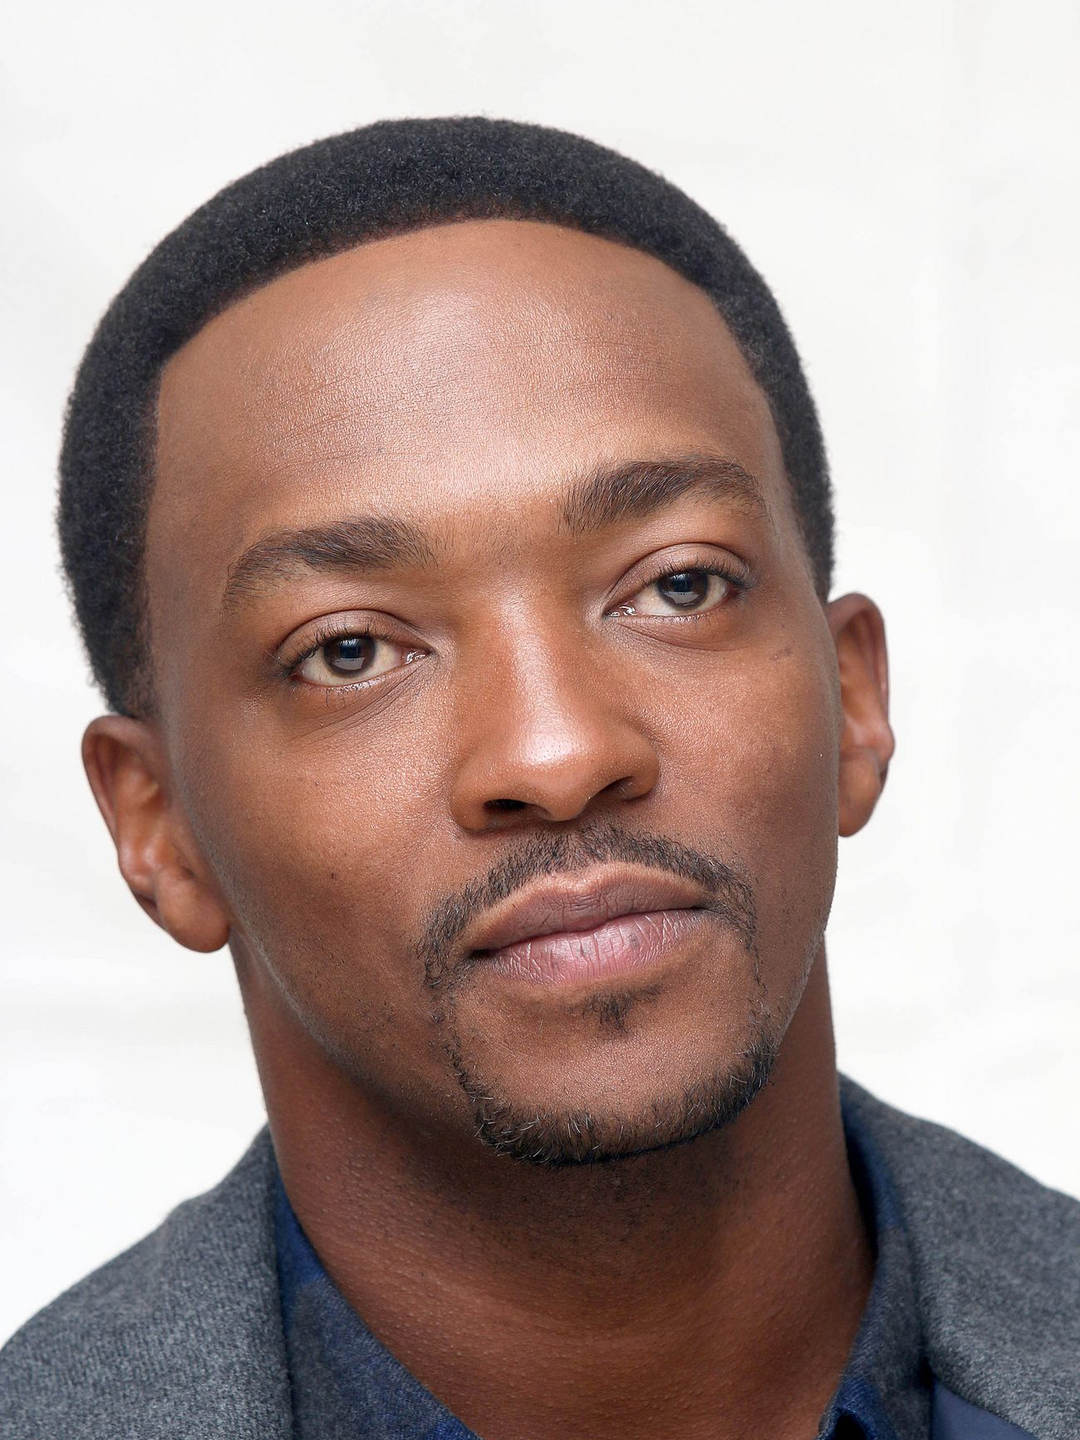 Anthony Mackie in his youth